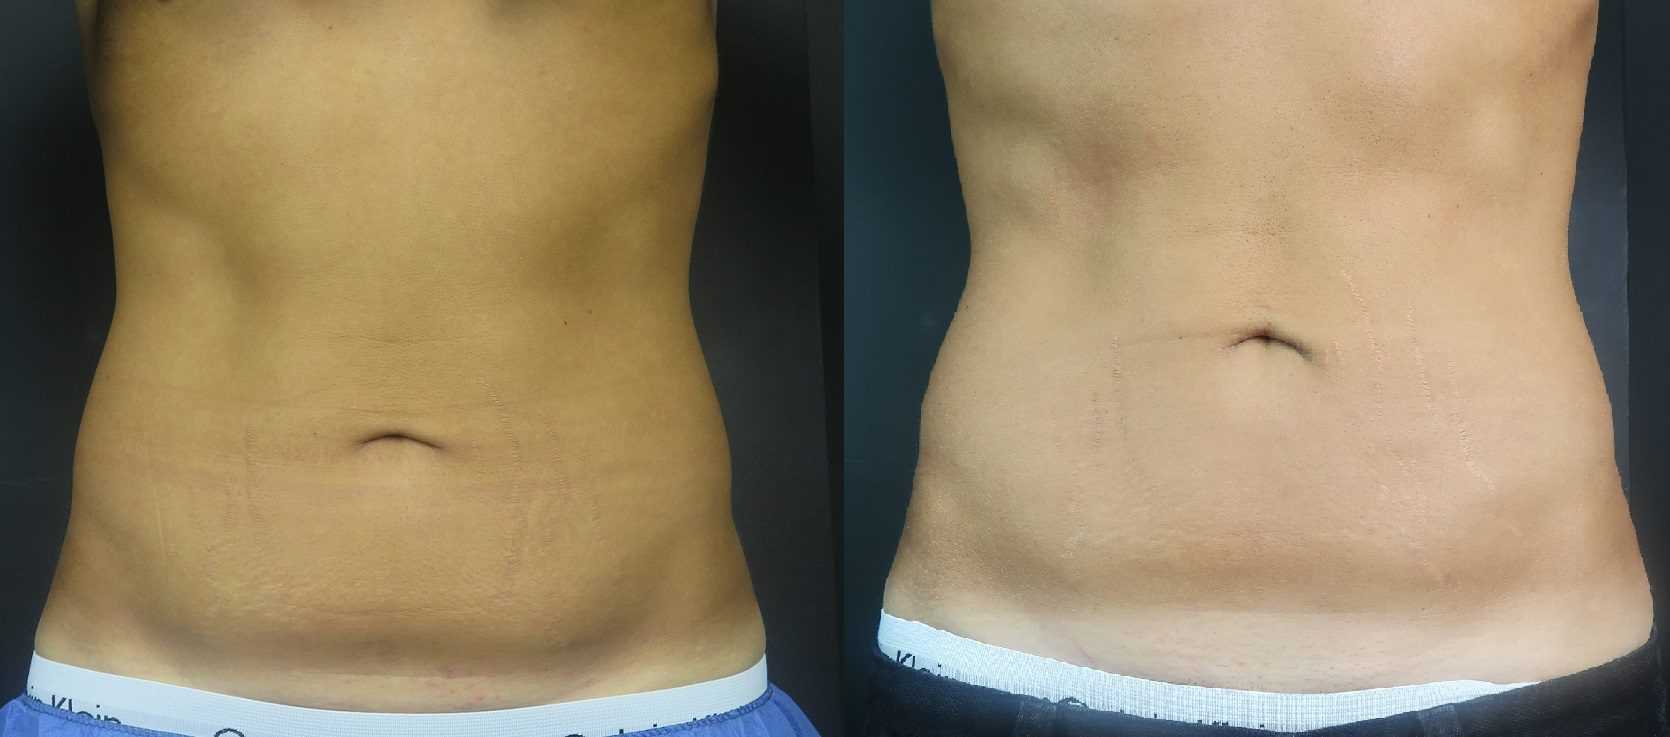 coolsculpting stubborn stomach fat before and after